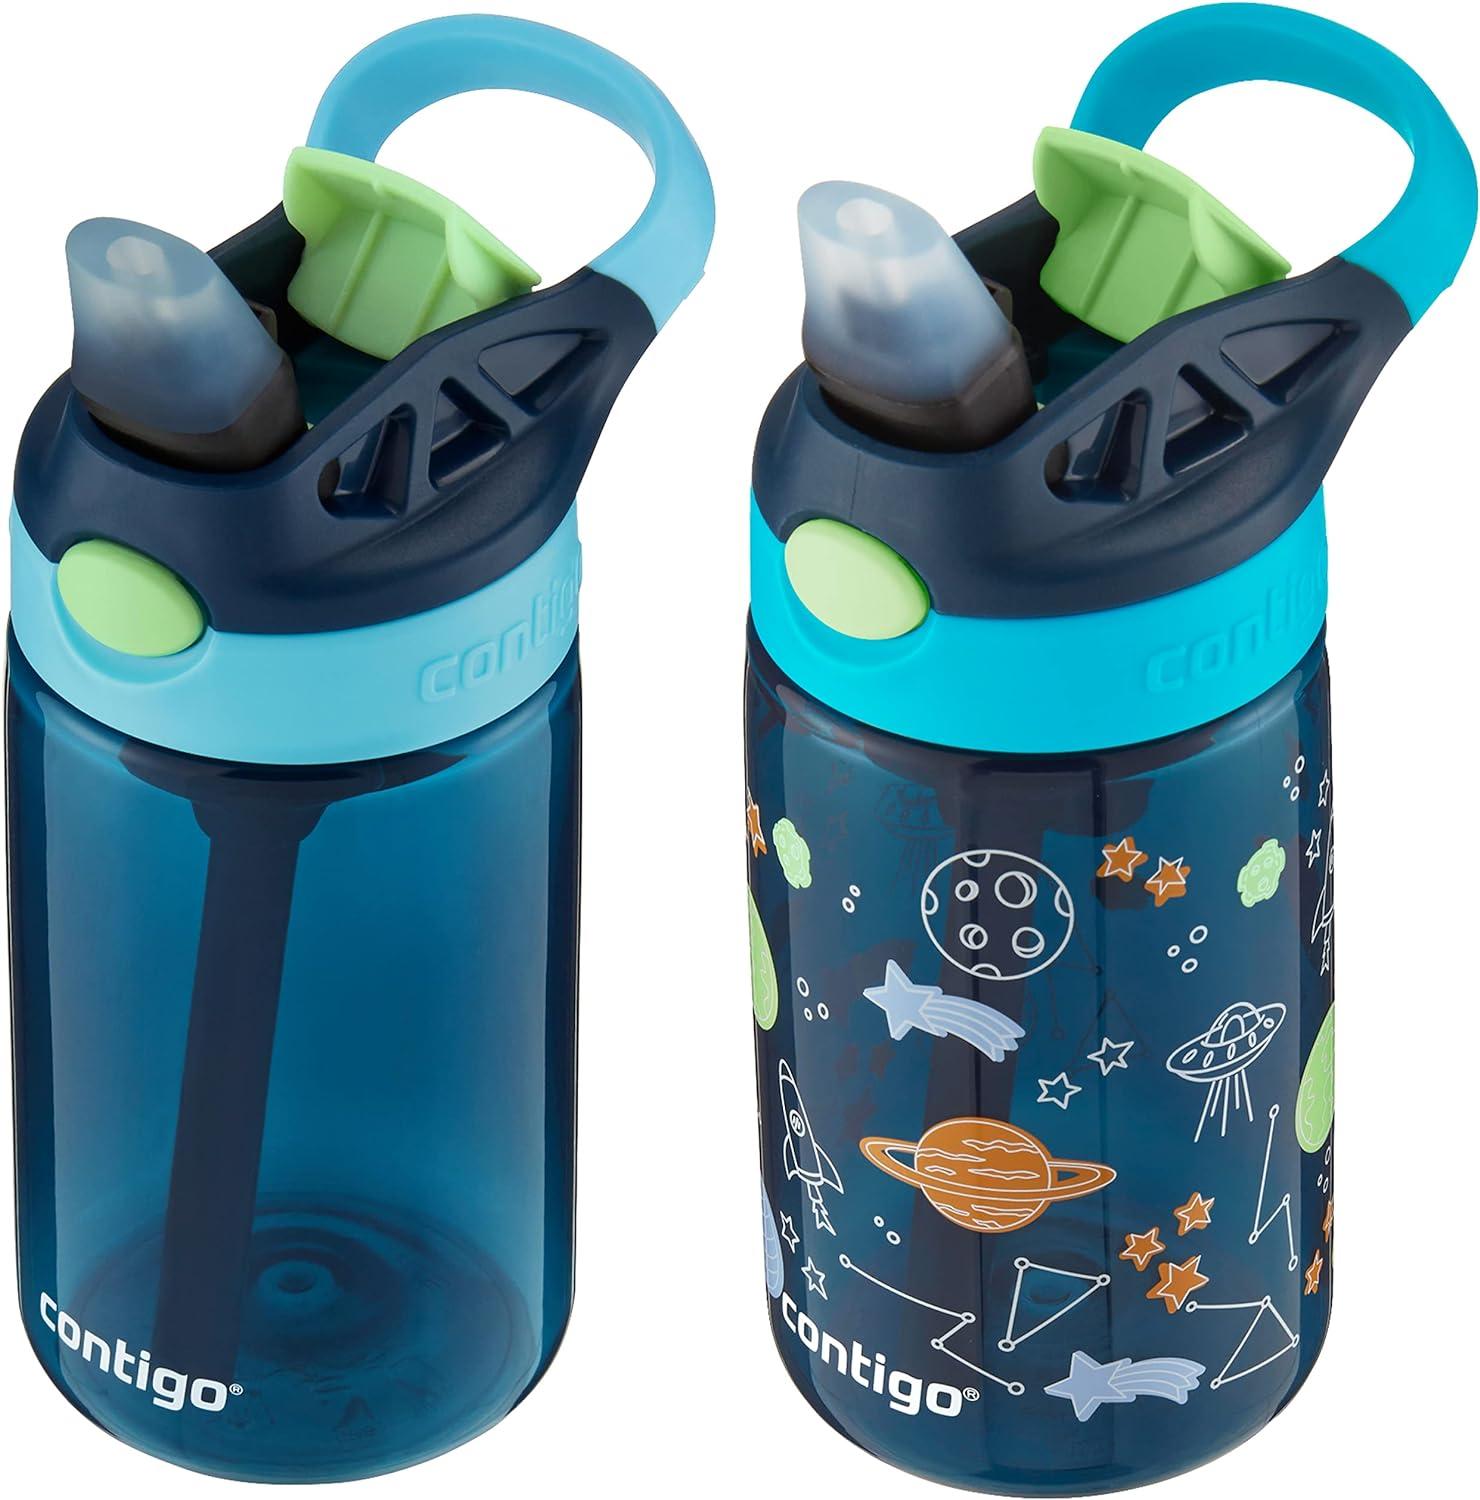 Contigo Aubrey Kids Cleanable Water Bottle with Silicone Straw and Spill-Proof Lid, Dishwasher Safe, 20oz 2-Pack, Blue Raspberry/Cool Lime 